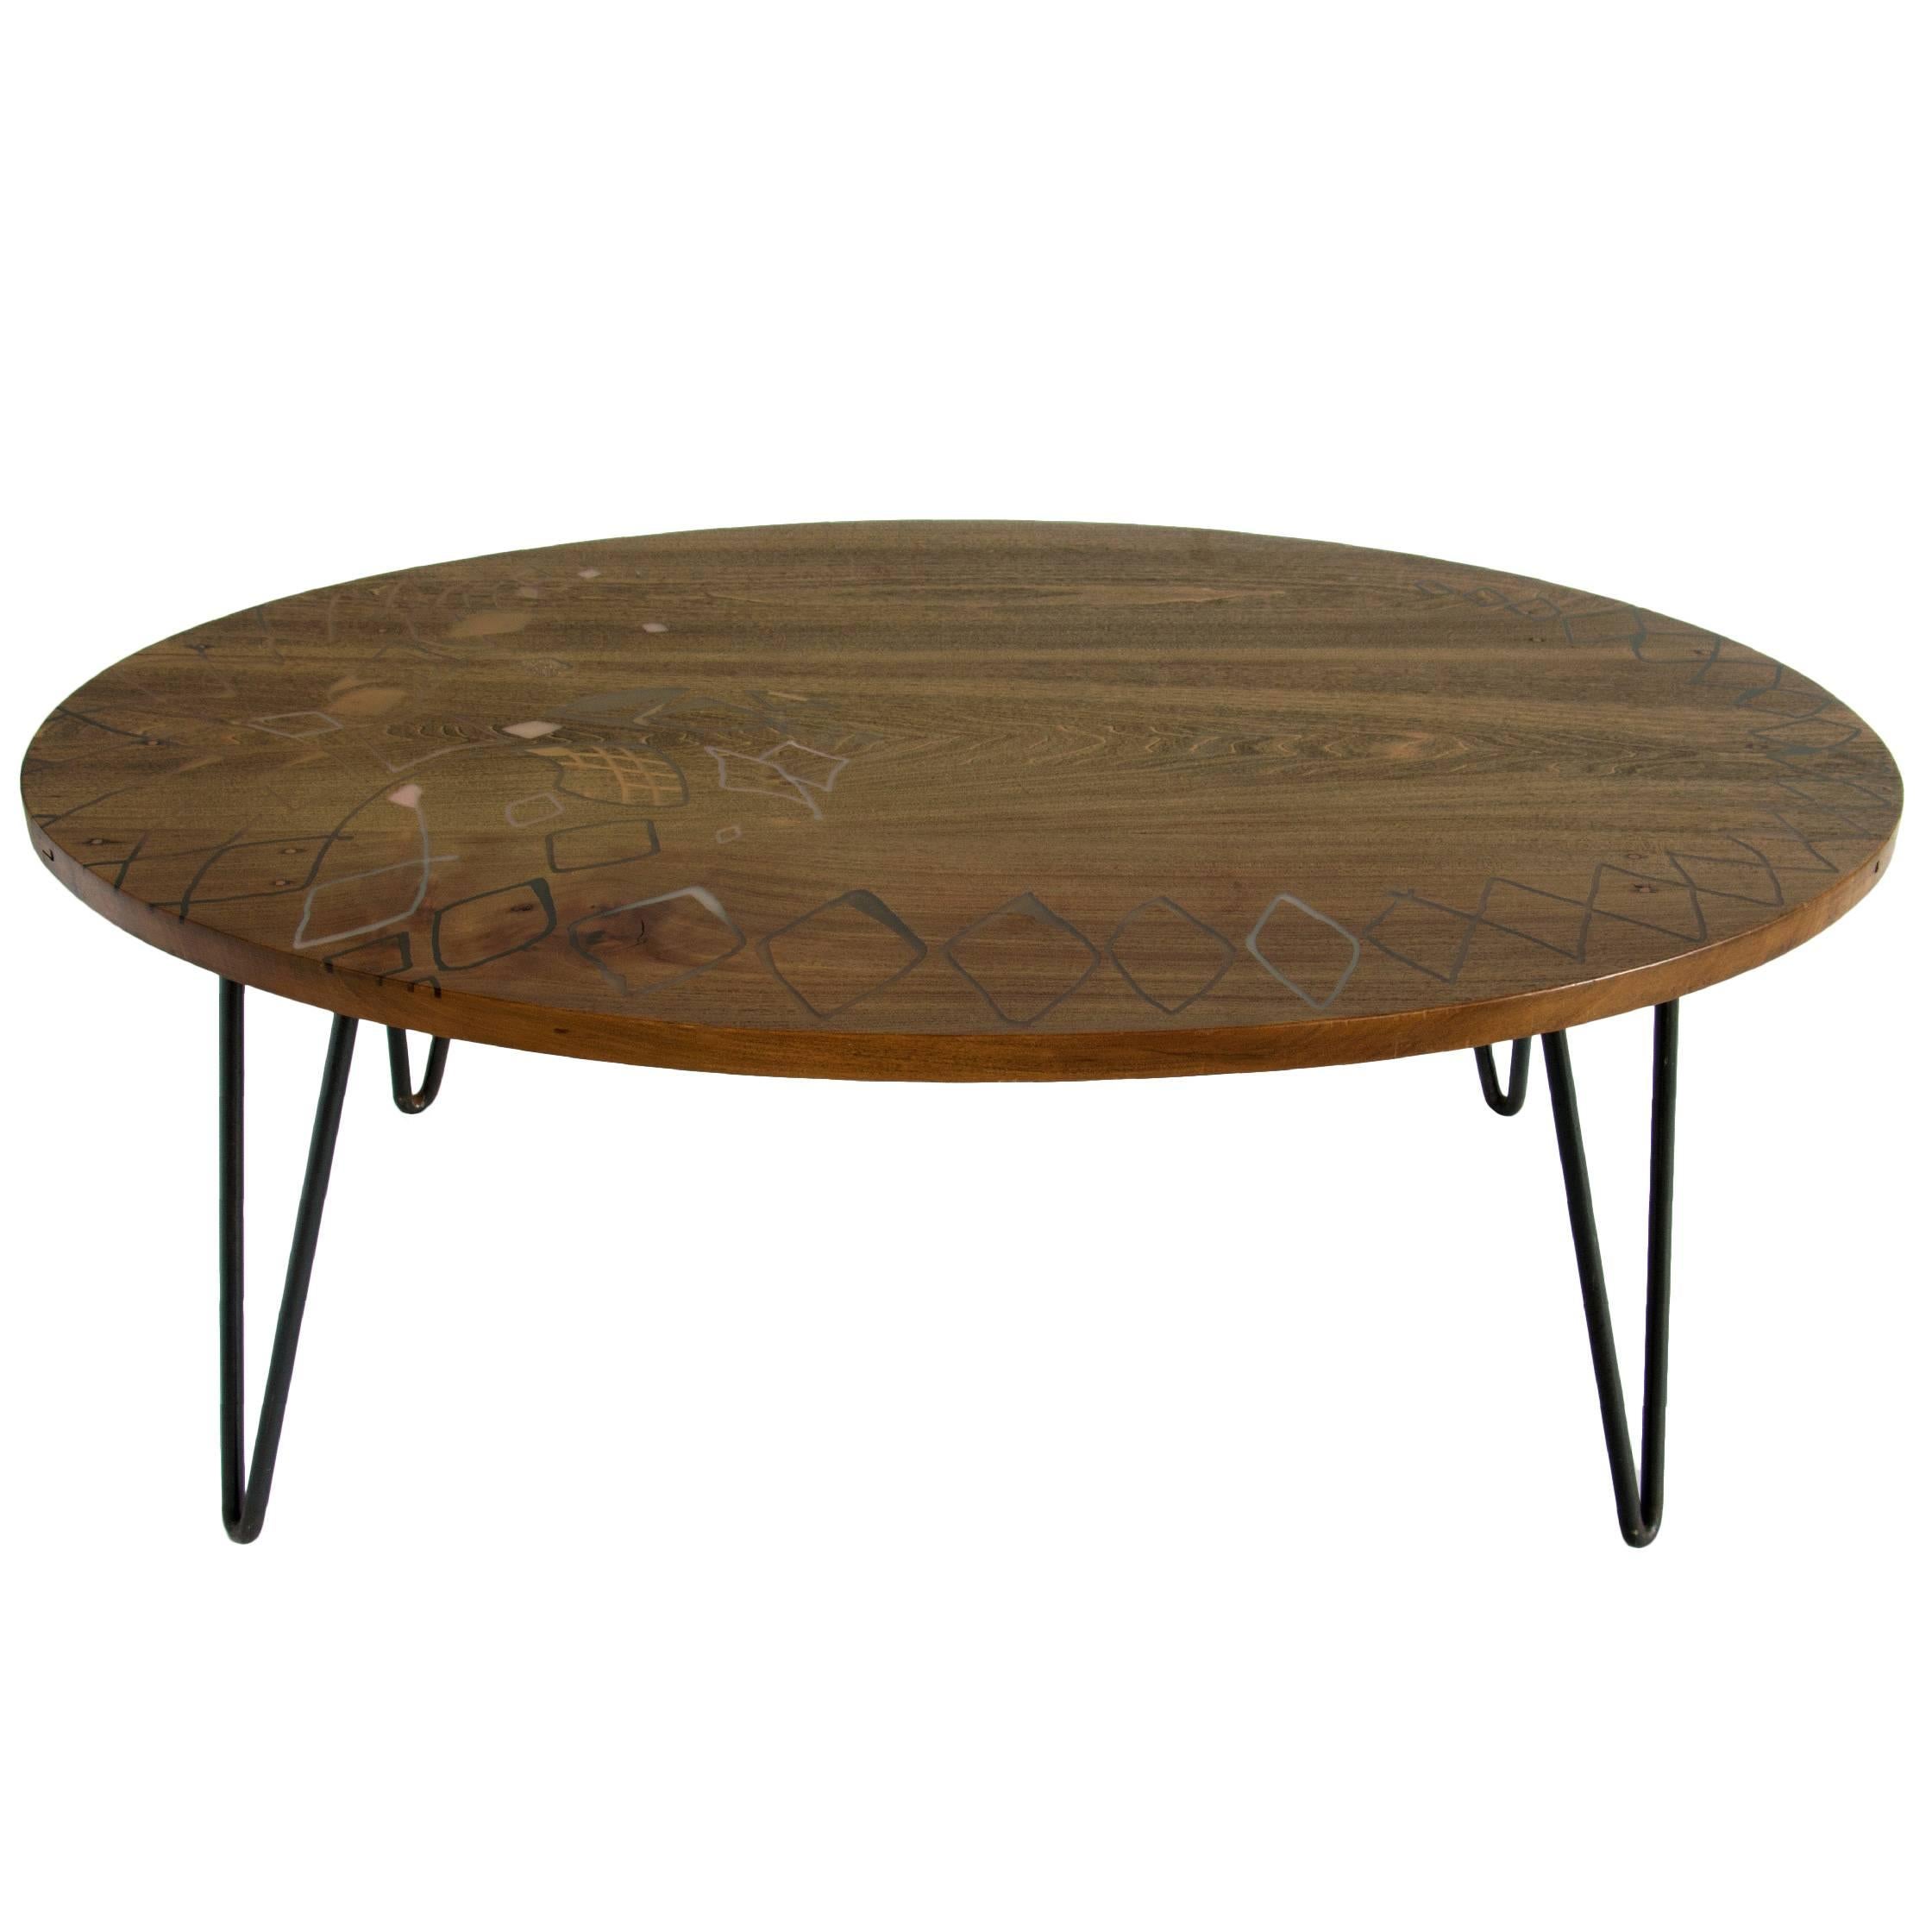 Sky with Diamonds Coffee / Cocktail Table, Inlaid Resin, Hairpin Legs - IN STOCK For Sale